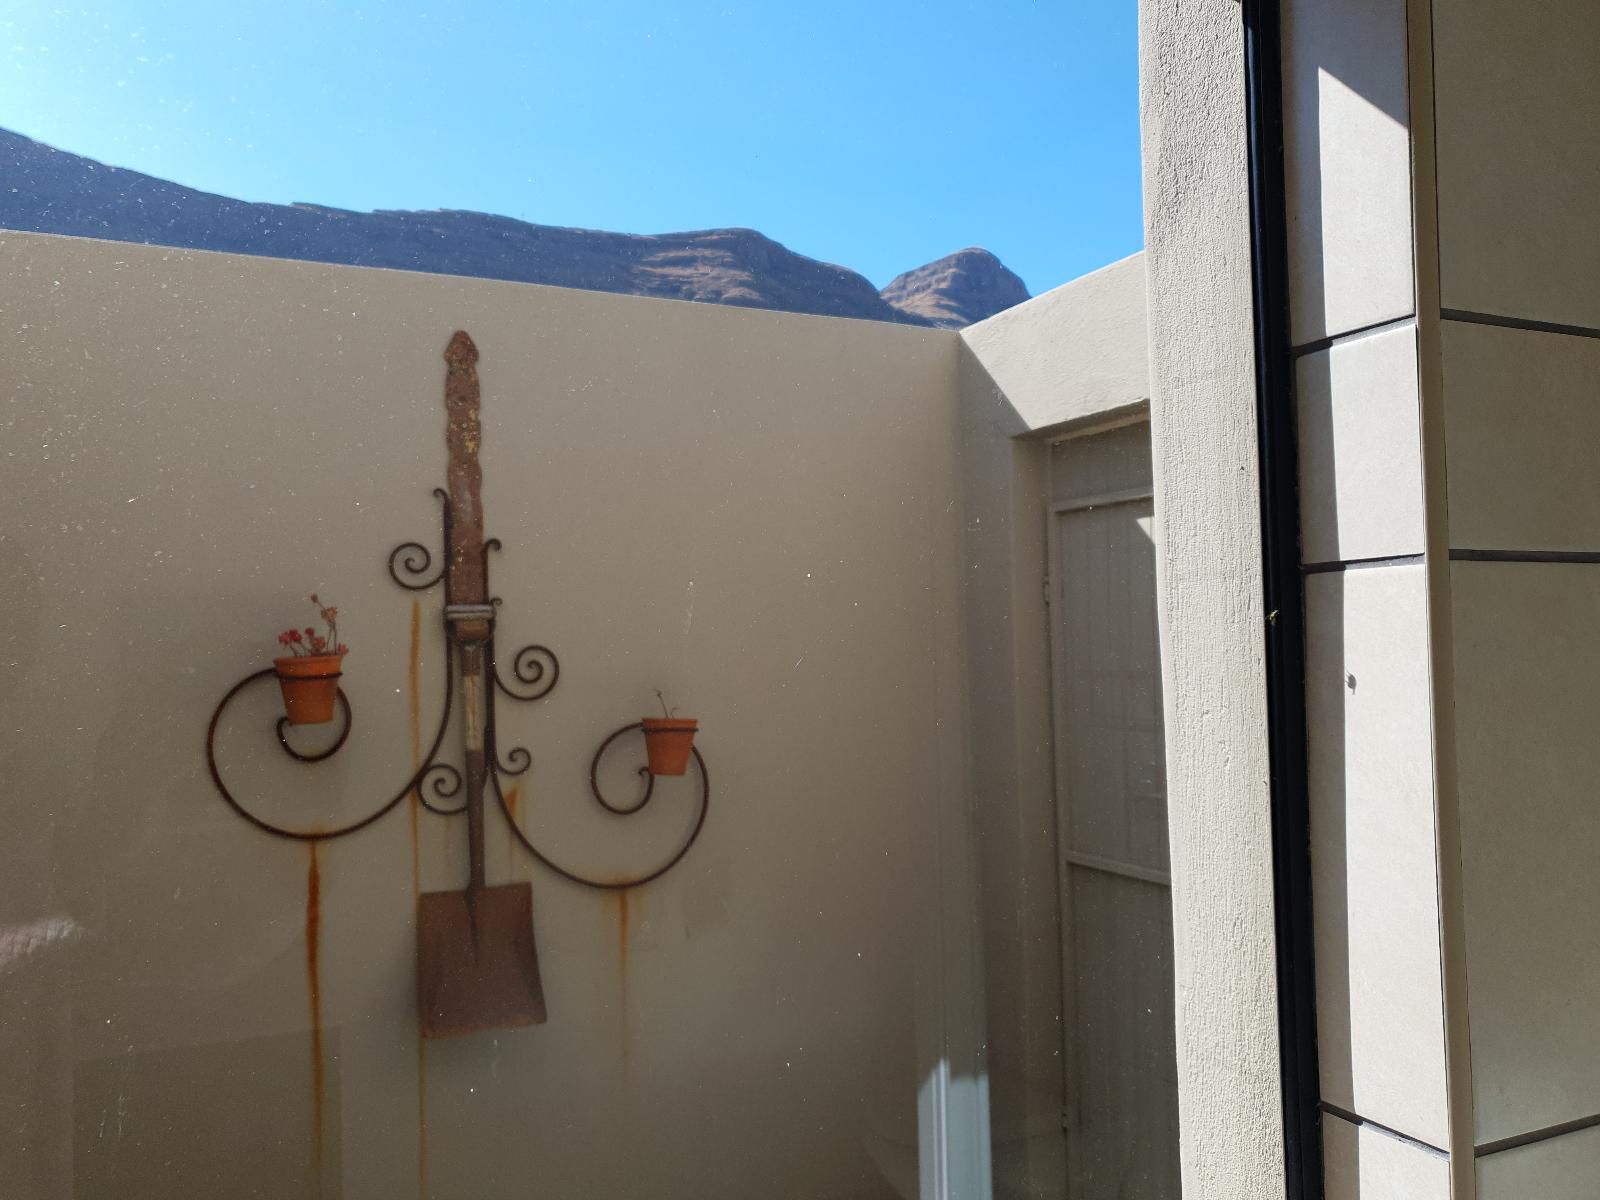 Cute And Quirky Clarens Clarens Golf And Trout Estate Clarens Free State South Africa Door, Architecture, Bathroom